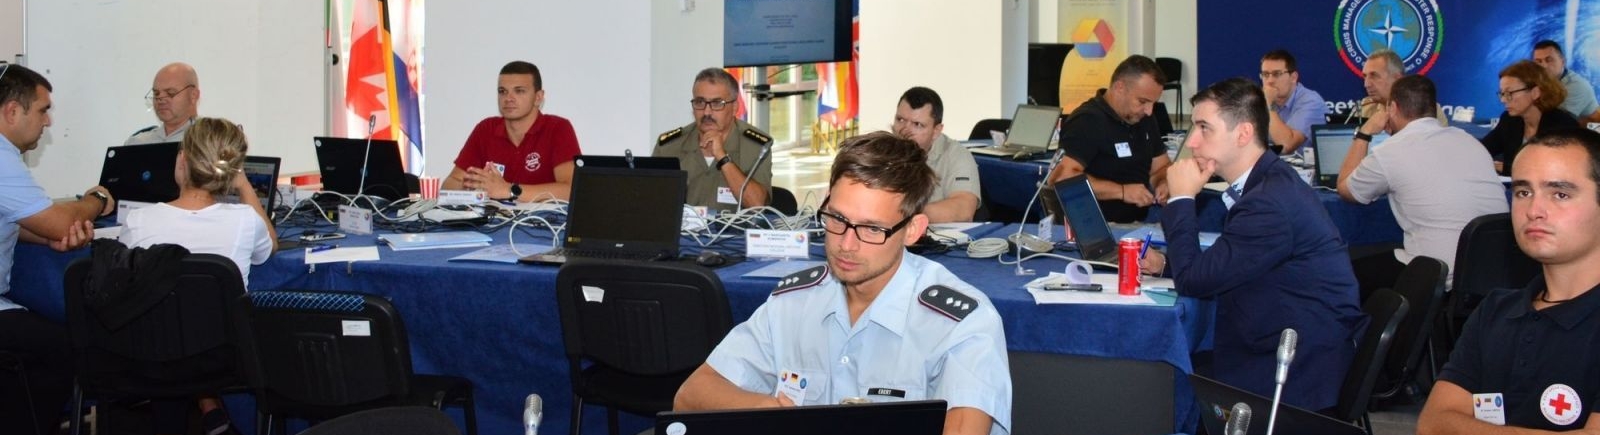 STRATEGIC DECISION MAKING FOR CRISIS RESPONSE OPERATIONS HYBRID (FACE-TO-FACE AND ON-LINE) COURSE - (NATO APPROVED; NATO ETOC CODE: ETE-CM-41879)